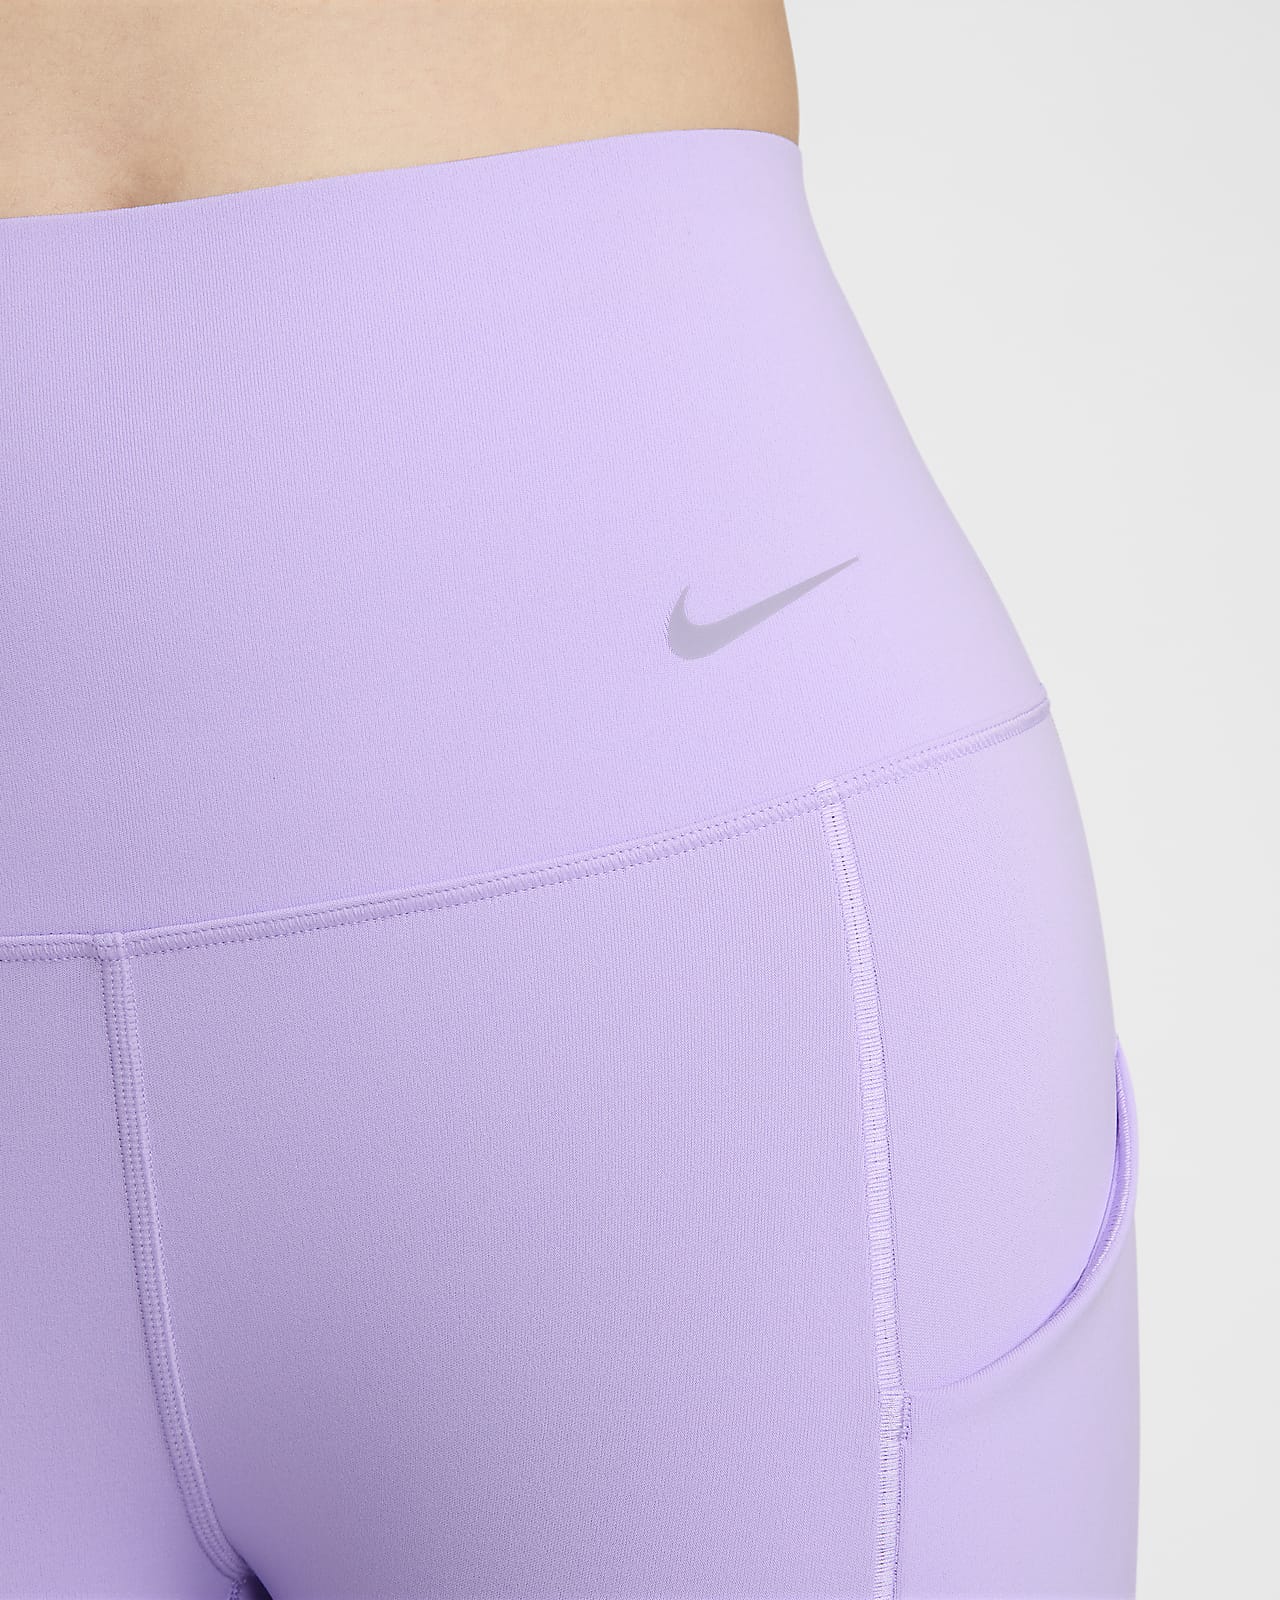 Nike Dri-FIT Universa High-Rise 7/8 Tights by Nike Online, THE ICONIC